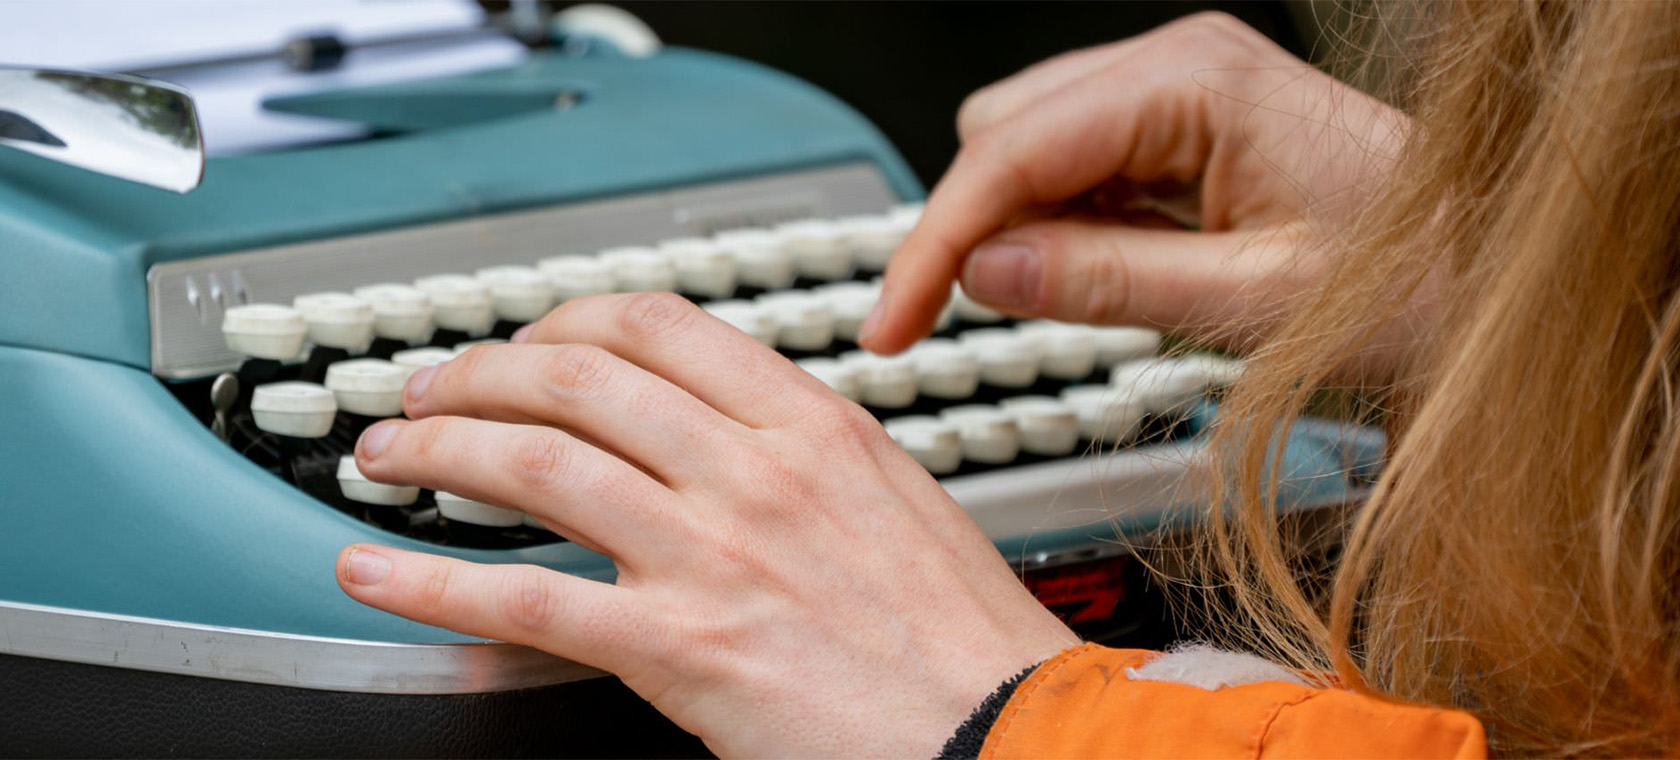 Close up of a woman's hands typing on an antique typewriter. 